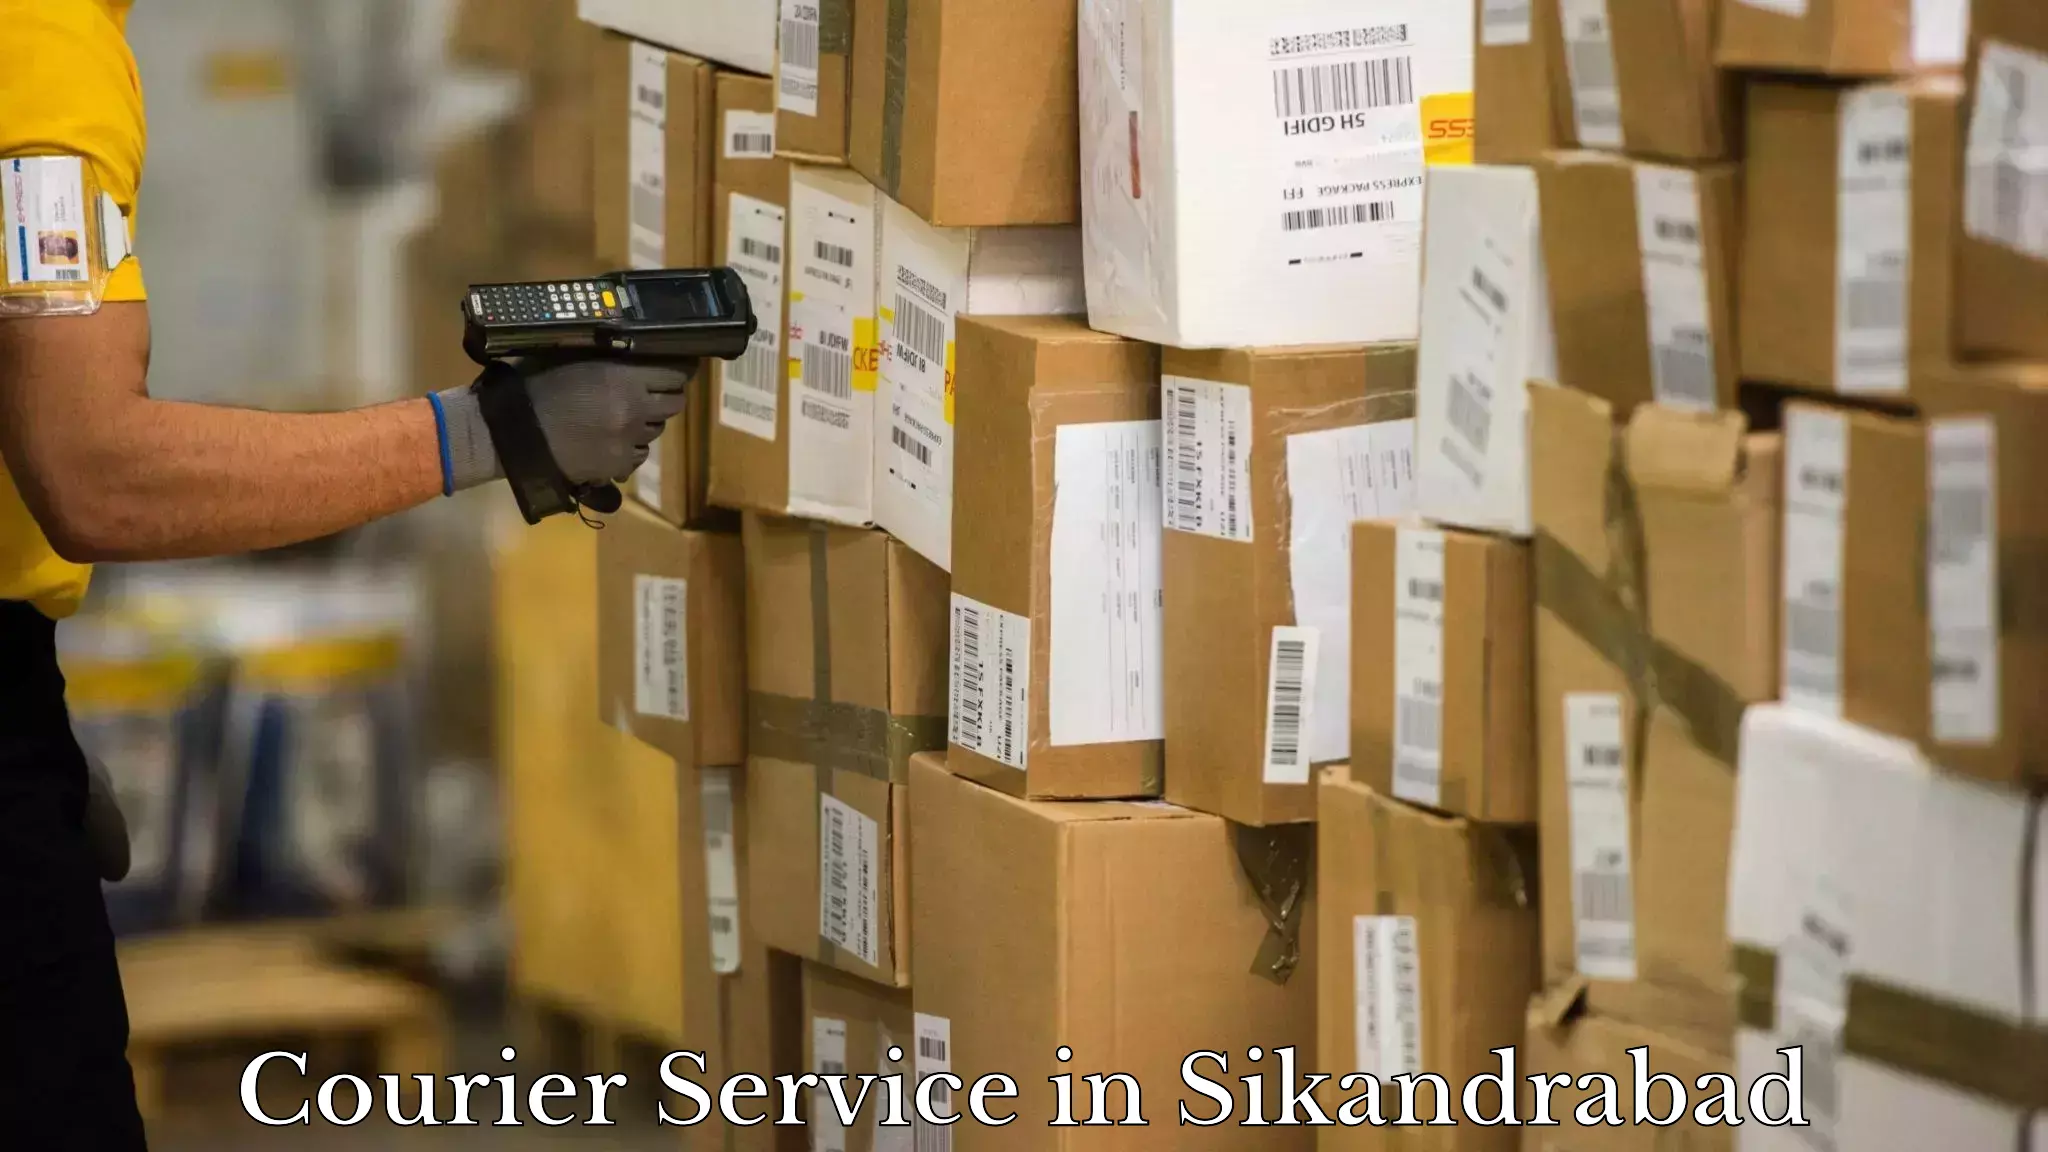 Personal parcel delivery in Sikandrabad